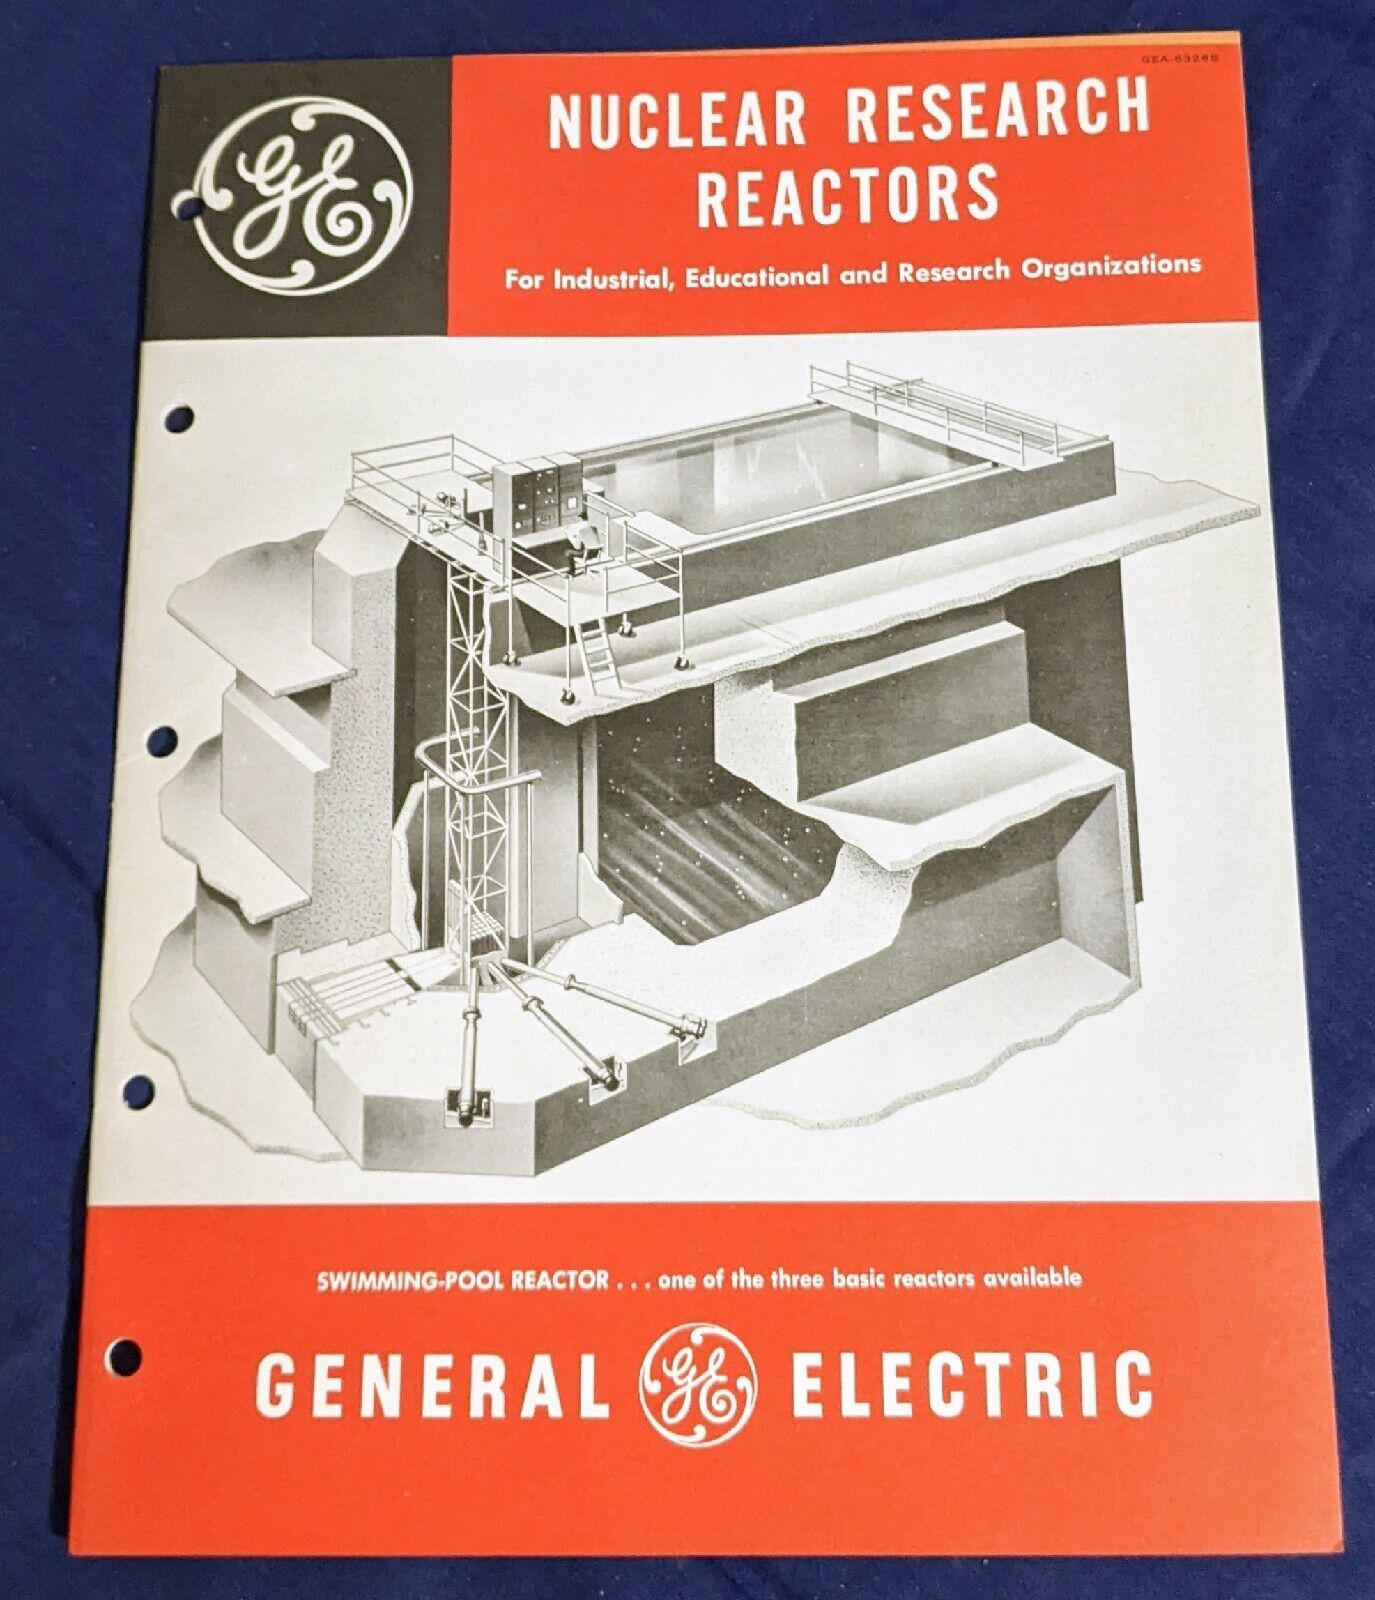 1956 Booklet NUCLEAR RESEARCH REACTORS 3 Types GENERAL ELECTRIC GEA-6326B